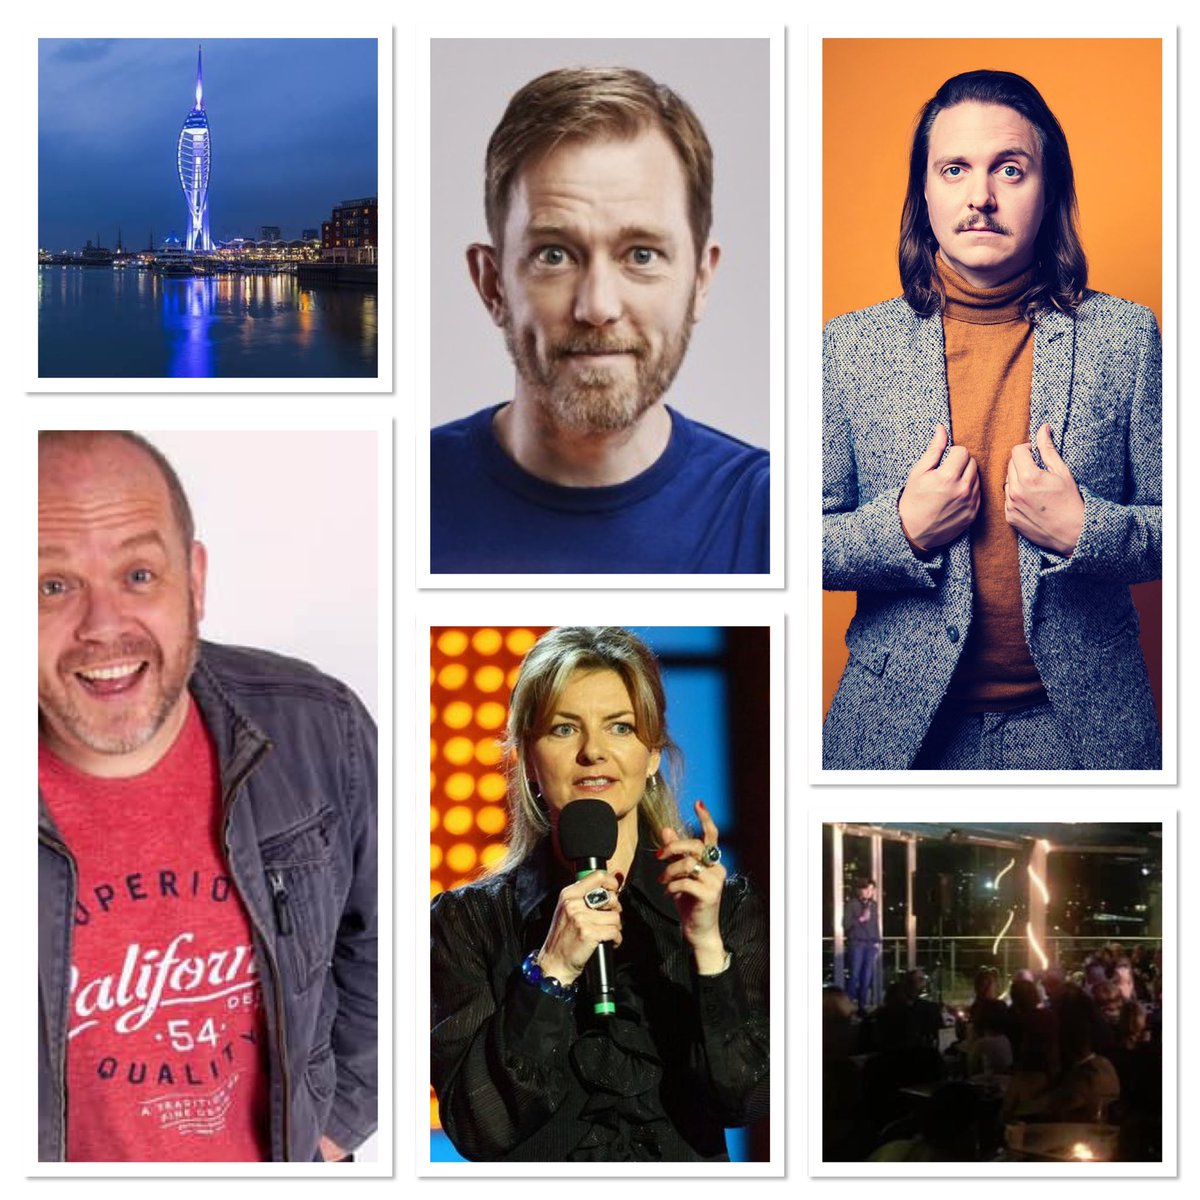 14th February is our Valentines show @SpinnakerTower in @GunwharfQuays #Portsmouth What a line up of comedians! Alun Cochrane, @thejoeypage @comedyjames and @Jo_Caulfield ! Don’t miss out on tickets! comedyatthetower.com